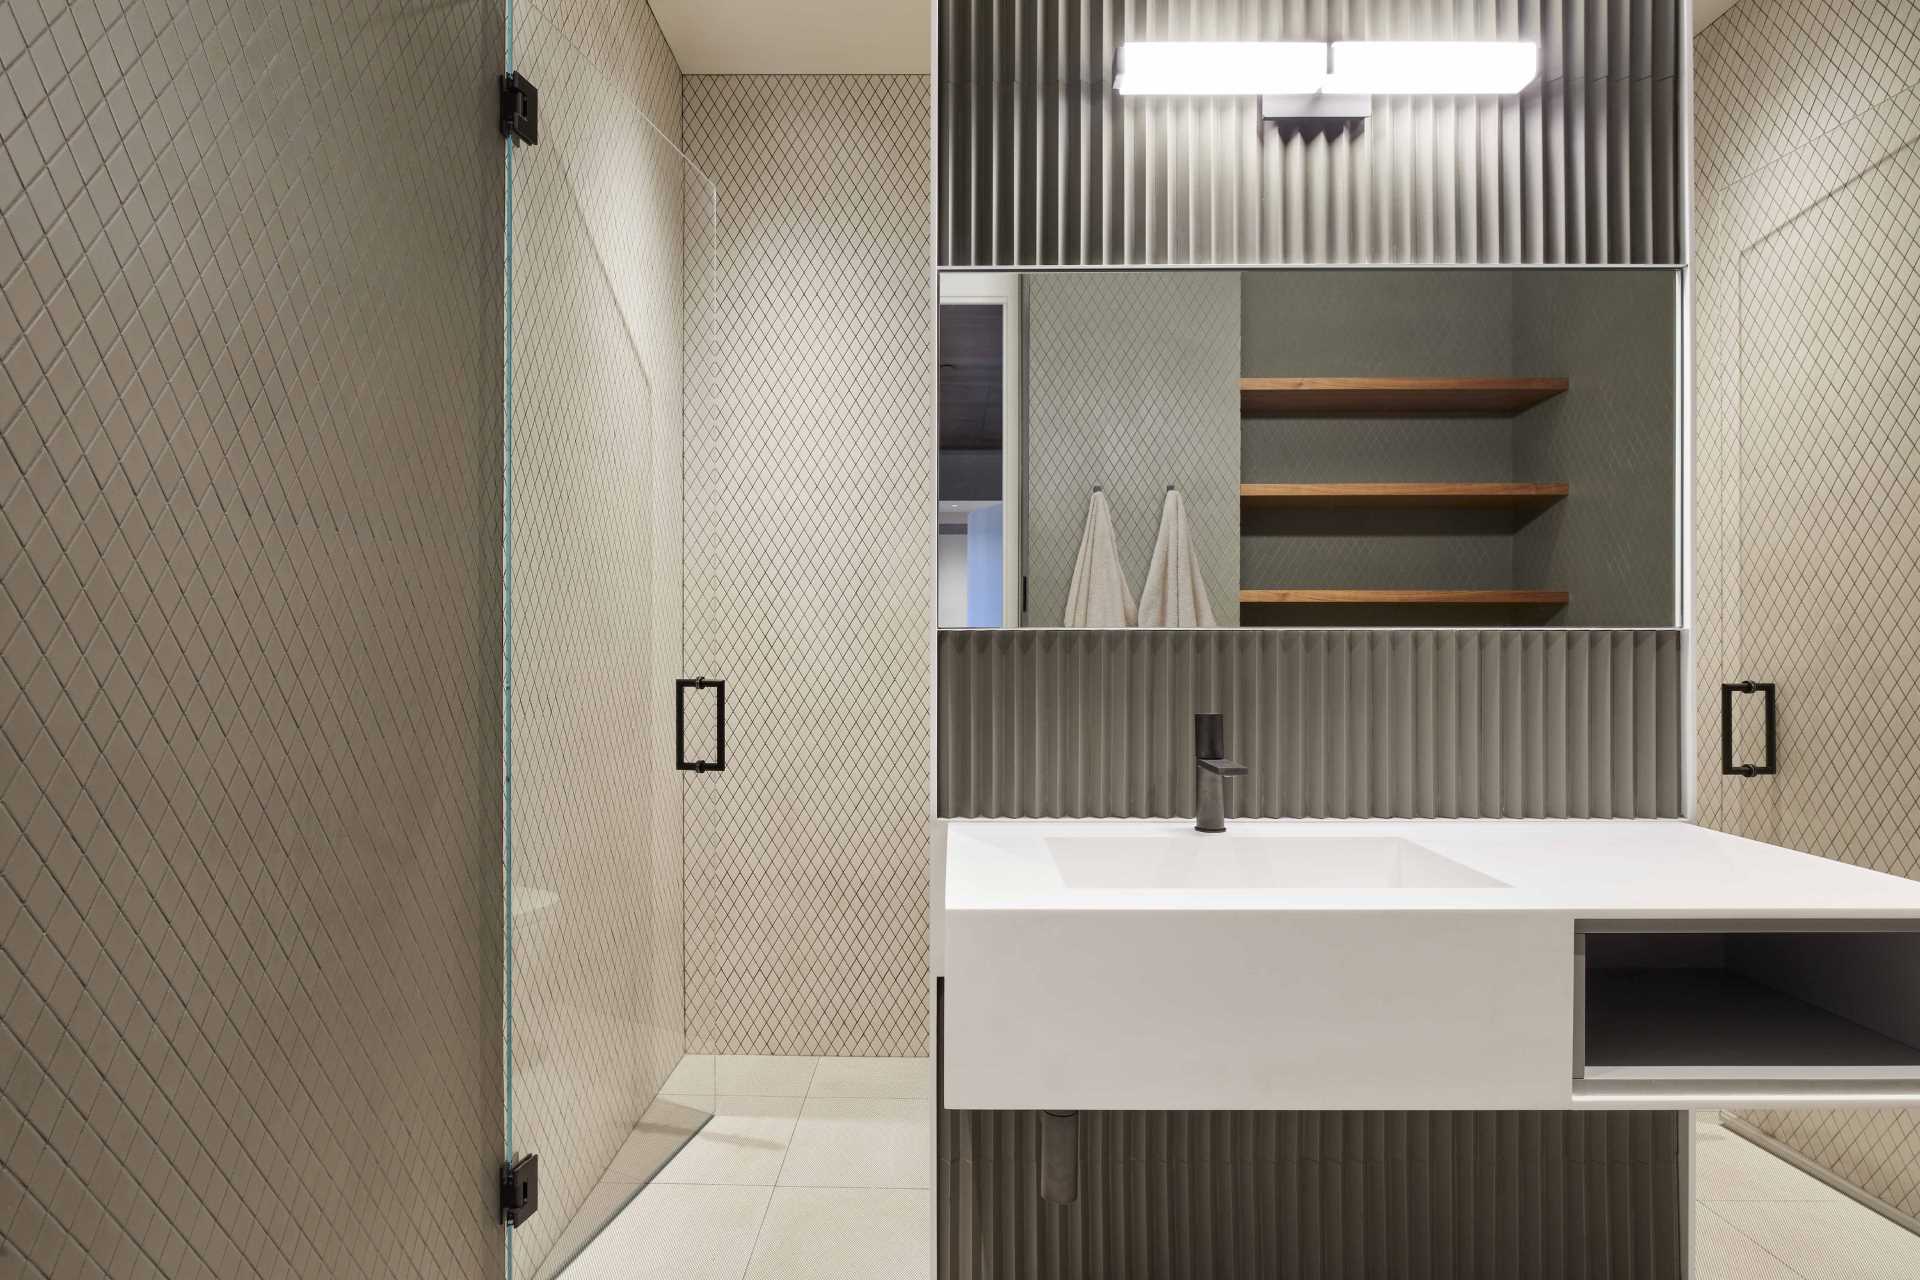 A modern bathroom with tiled-covered walls and a textured element behind the vanity and mirror.